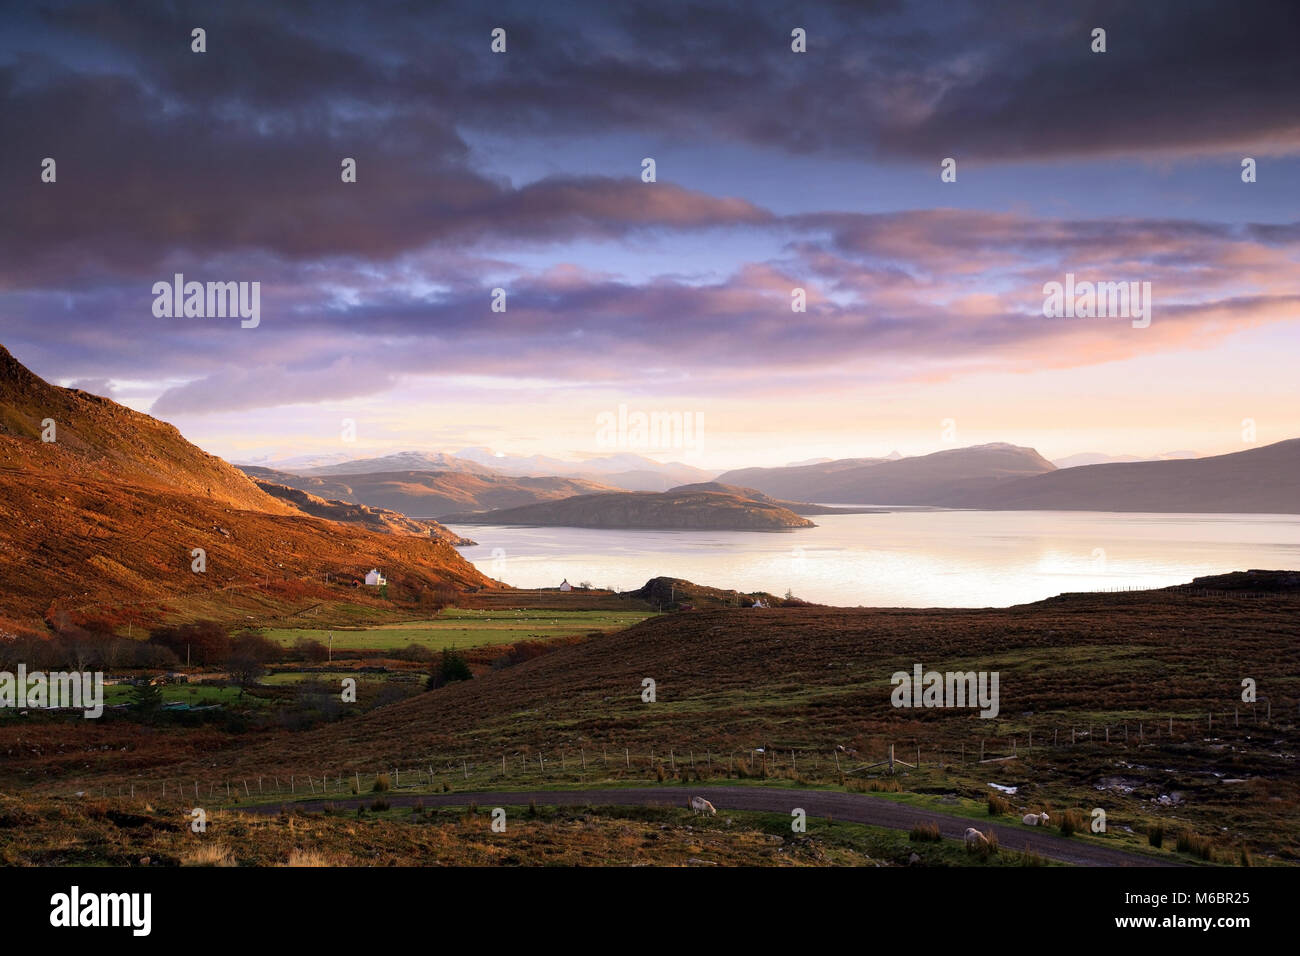 A winter view across the Wester Ross coast looking towards Loch Broom as the sun sets. Stock Photo